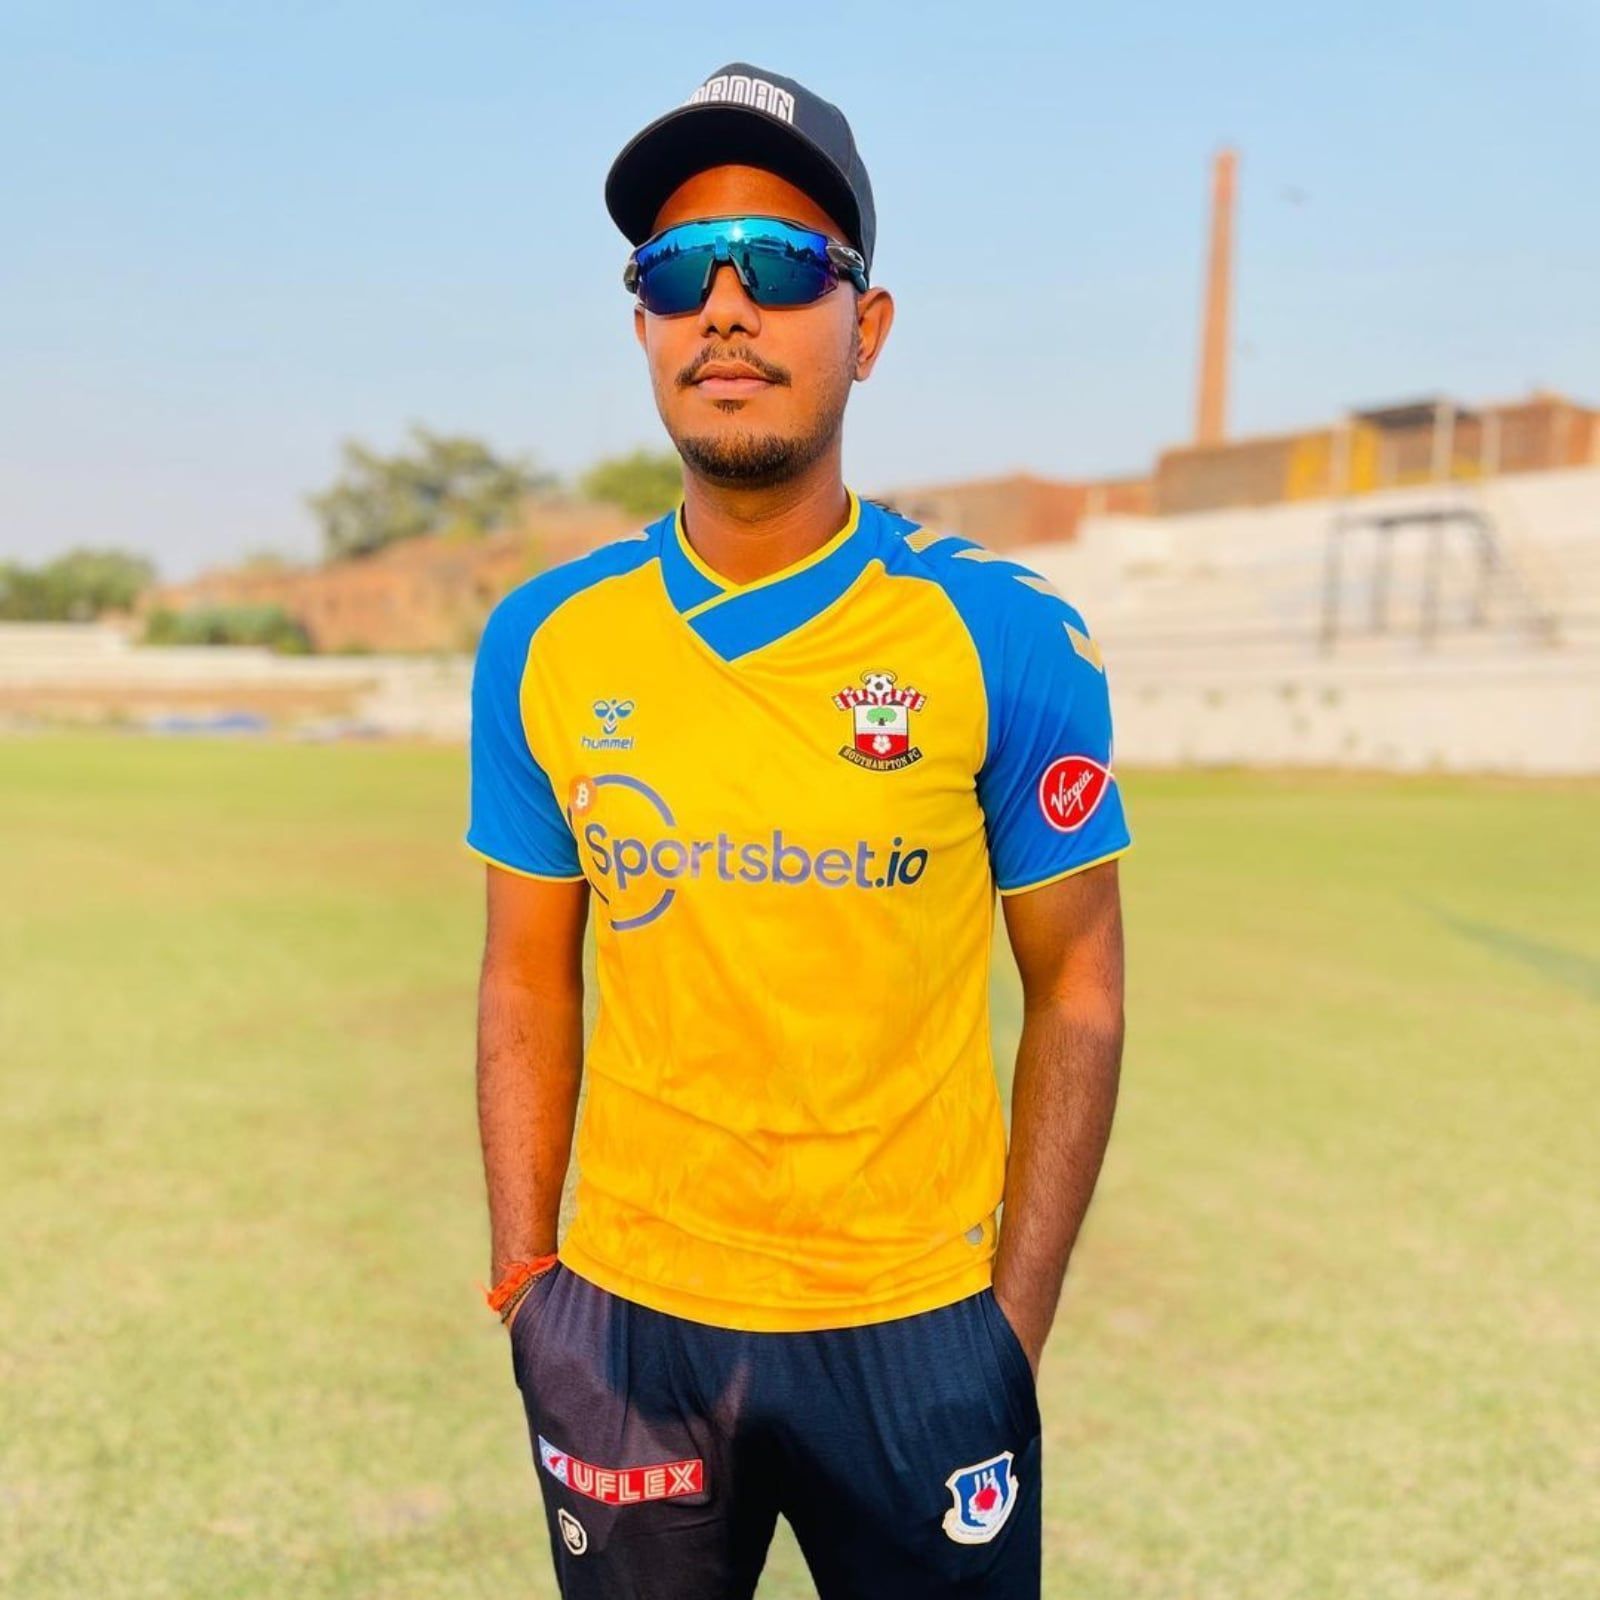 Can Yash Dayal impress in his debut IPL campaign?